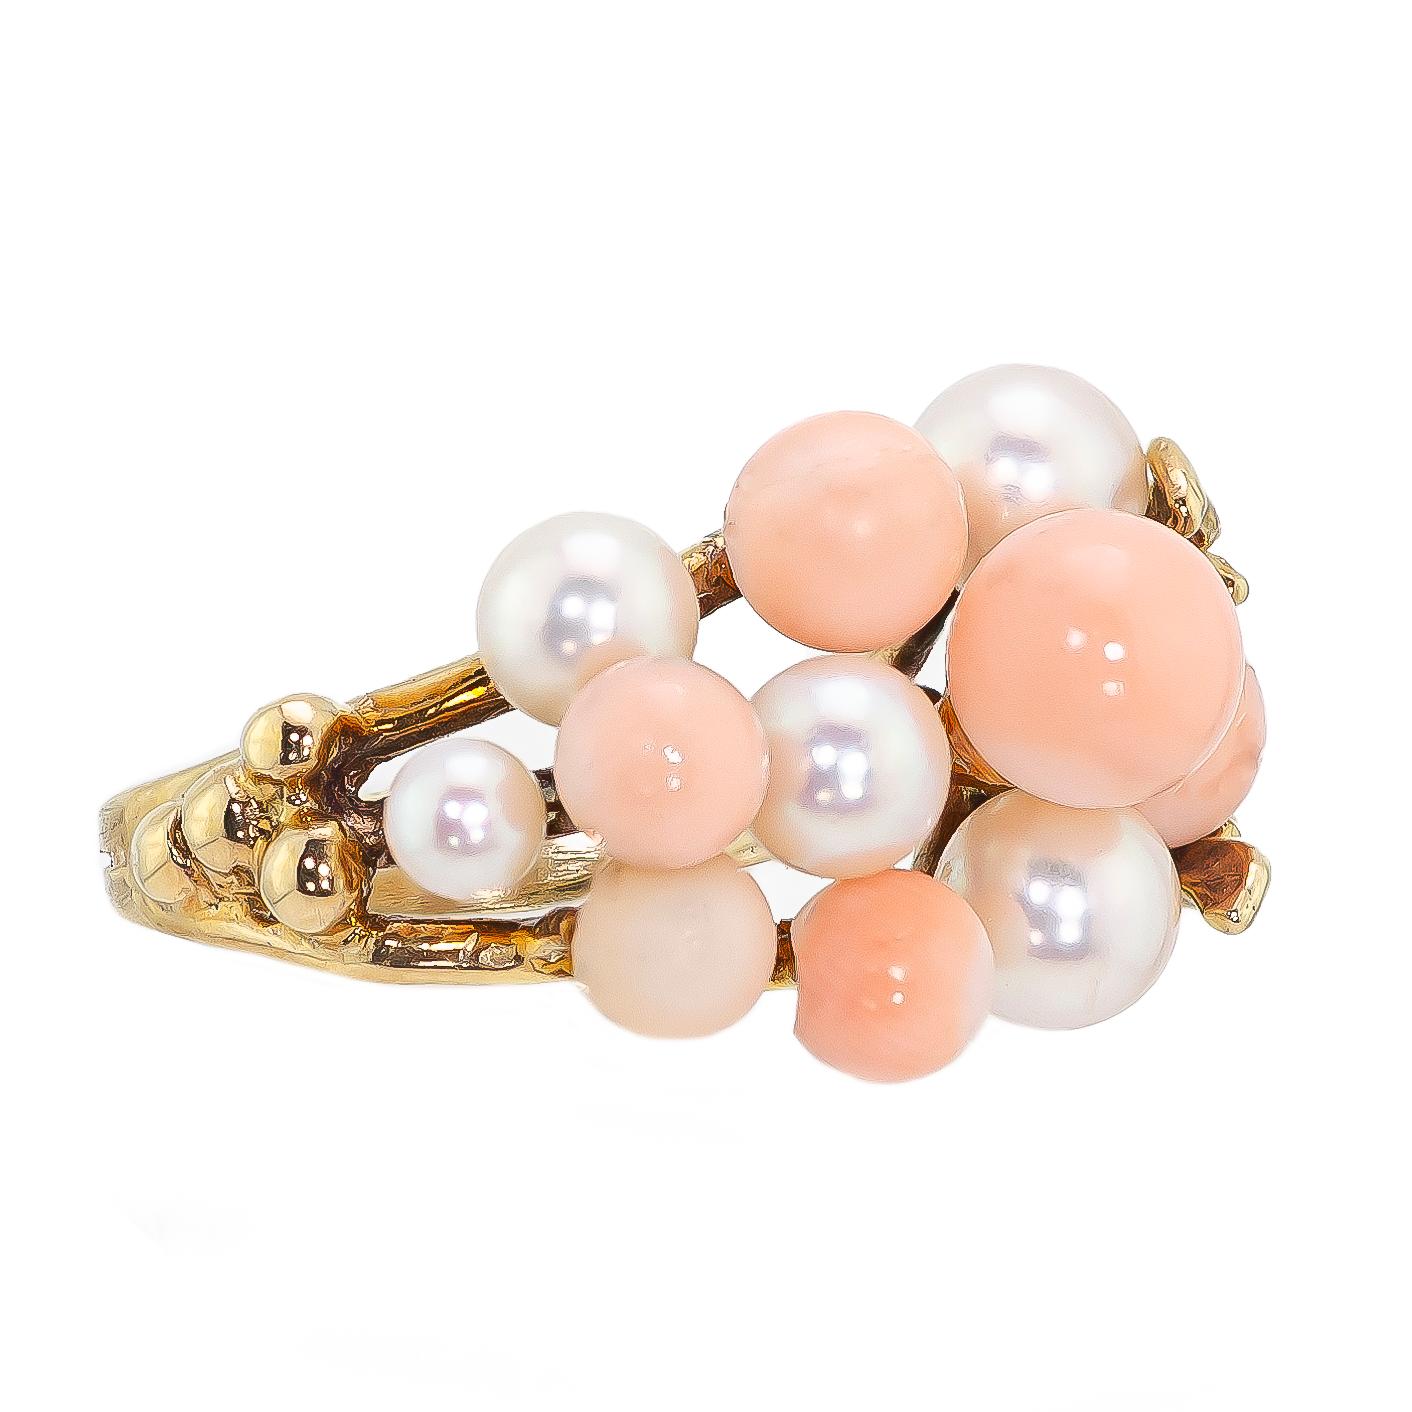 Vintage 1960 coral cultured pearl and yellow gold ring set with a variety of round differing sizes light pink coral beads and cultued pearls set into a 